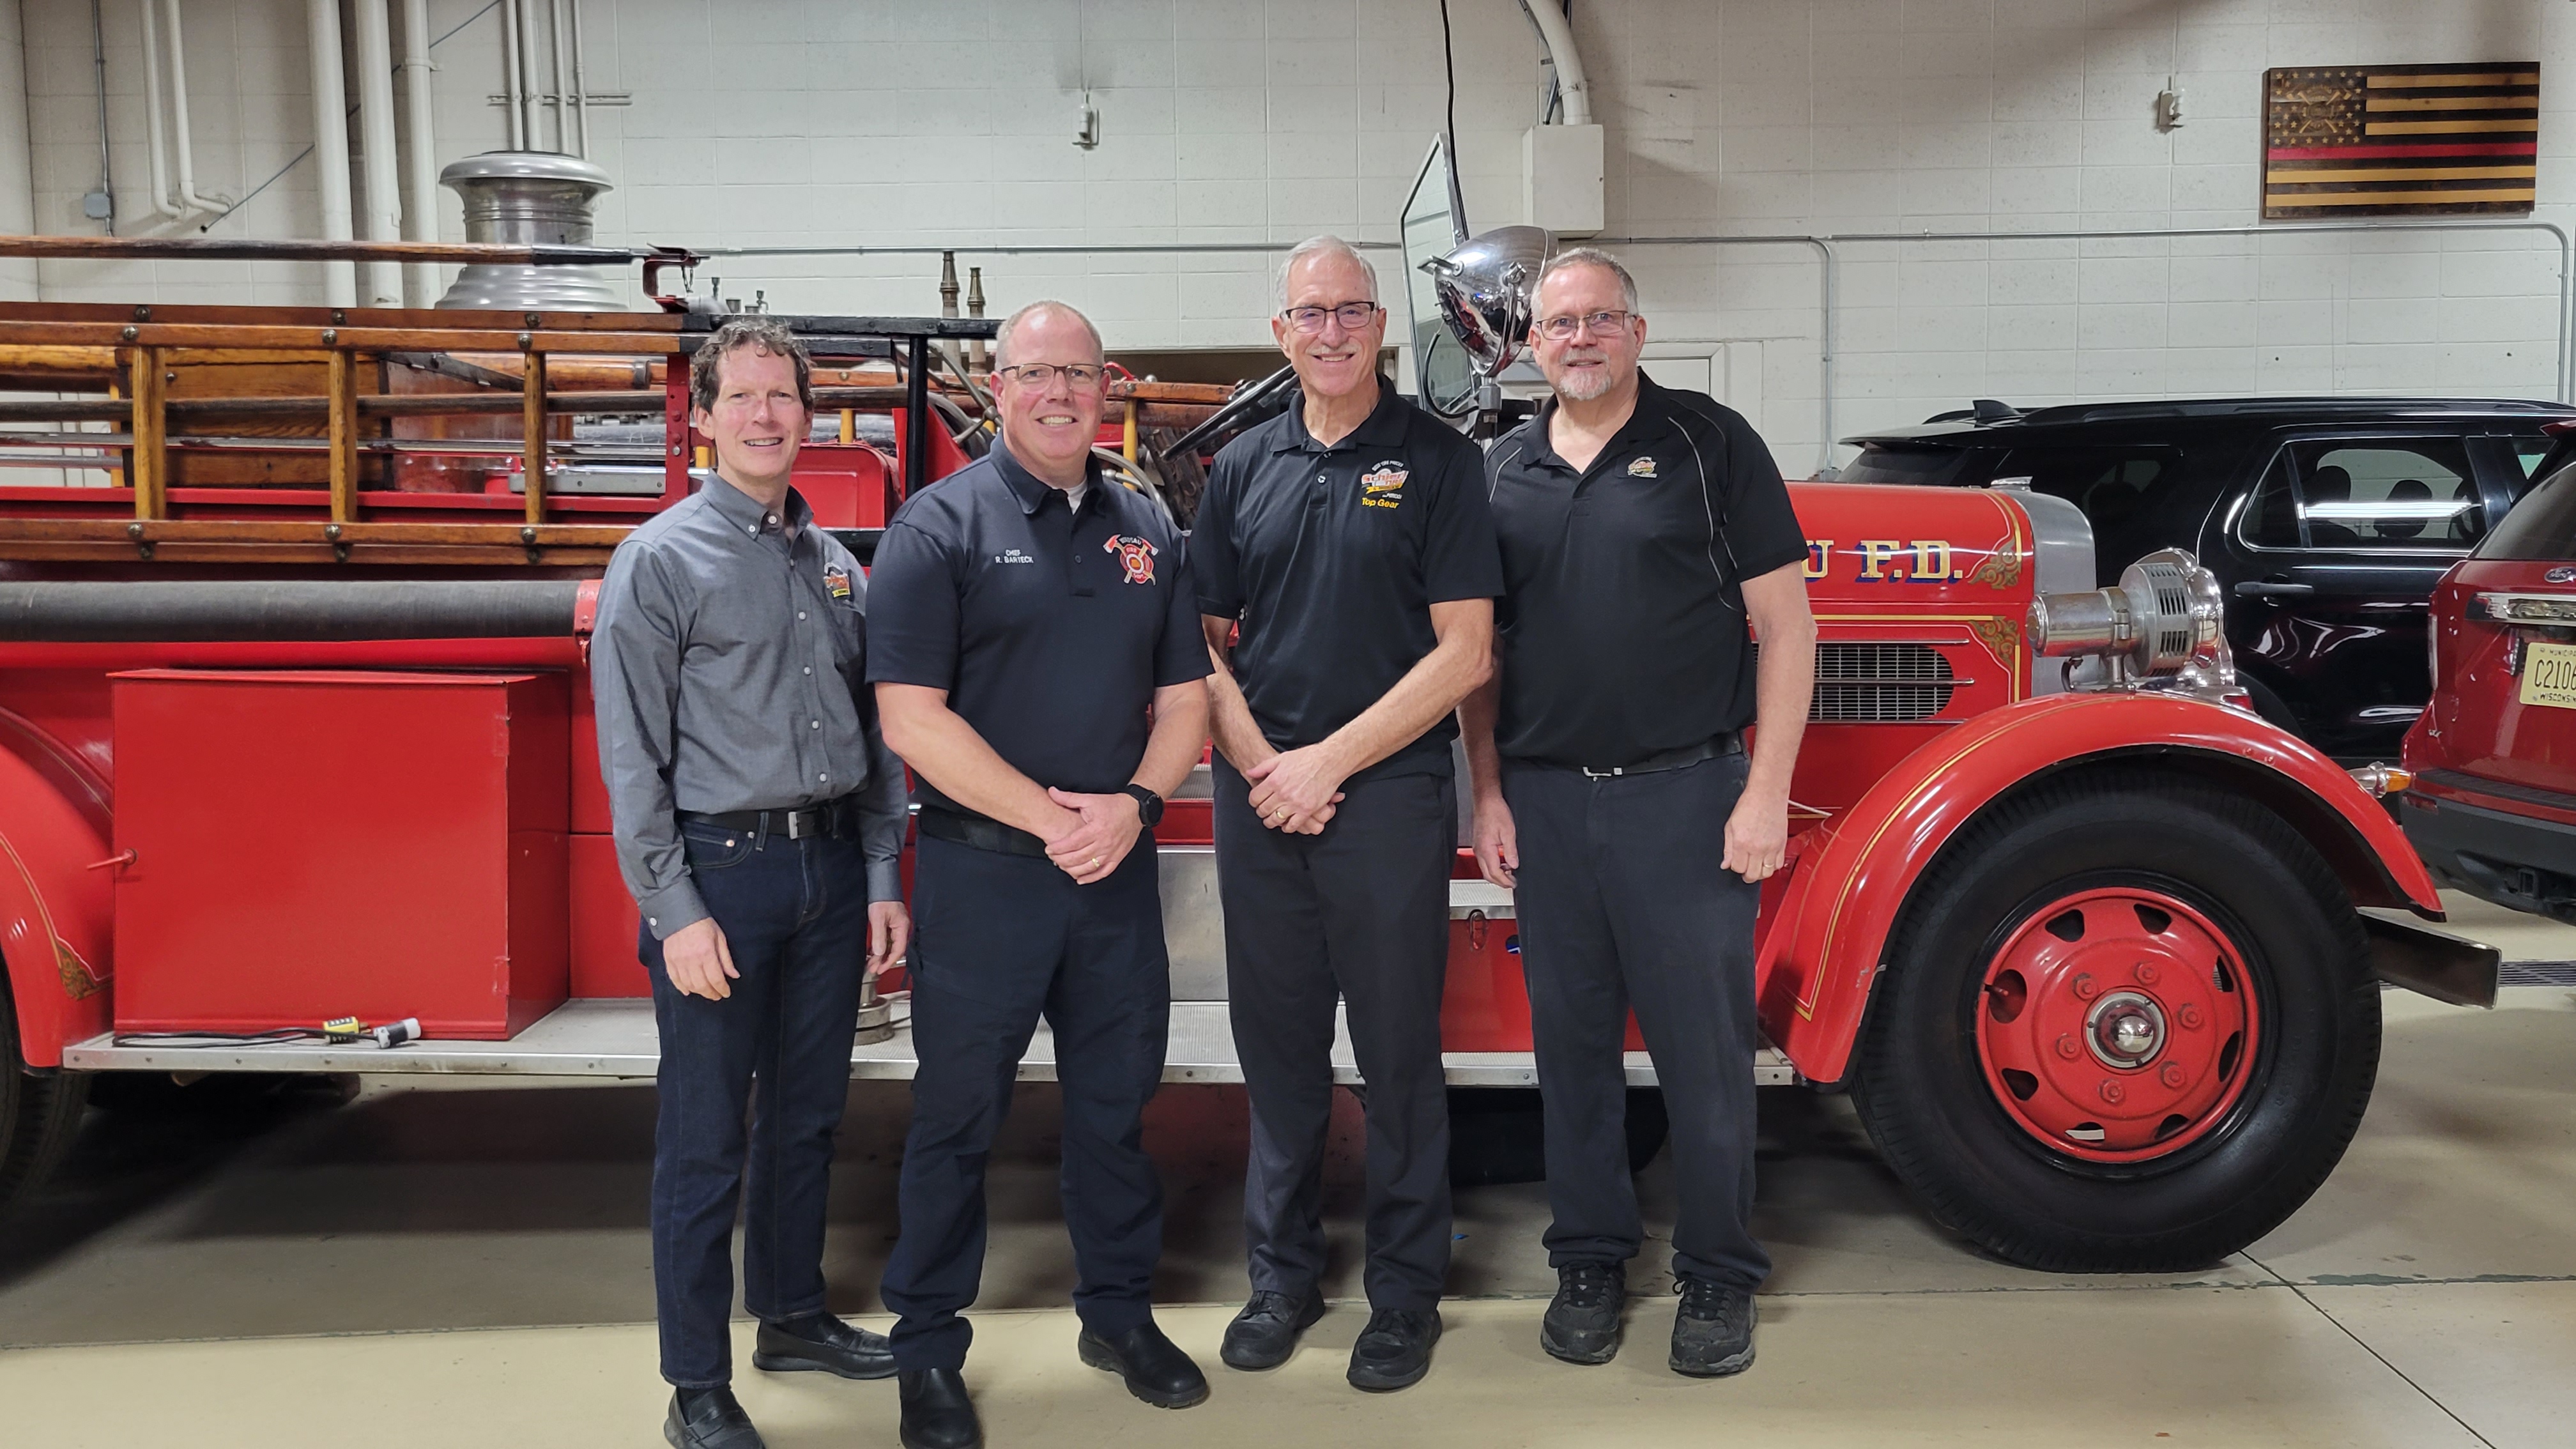 All About The Car Podcast Episode 57: Wausau Fire Department, Chief Bartek